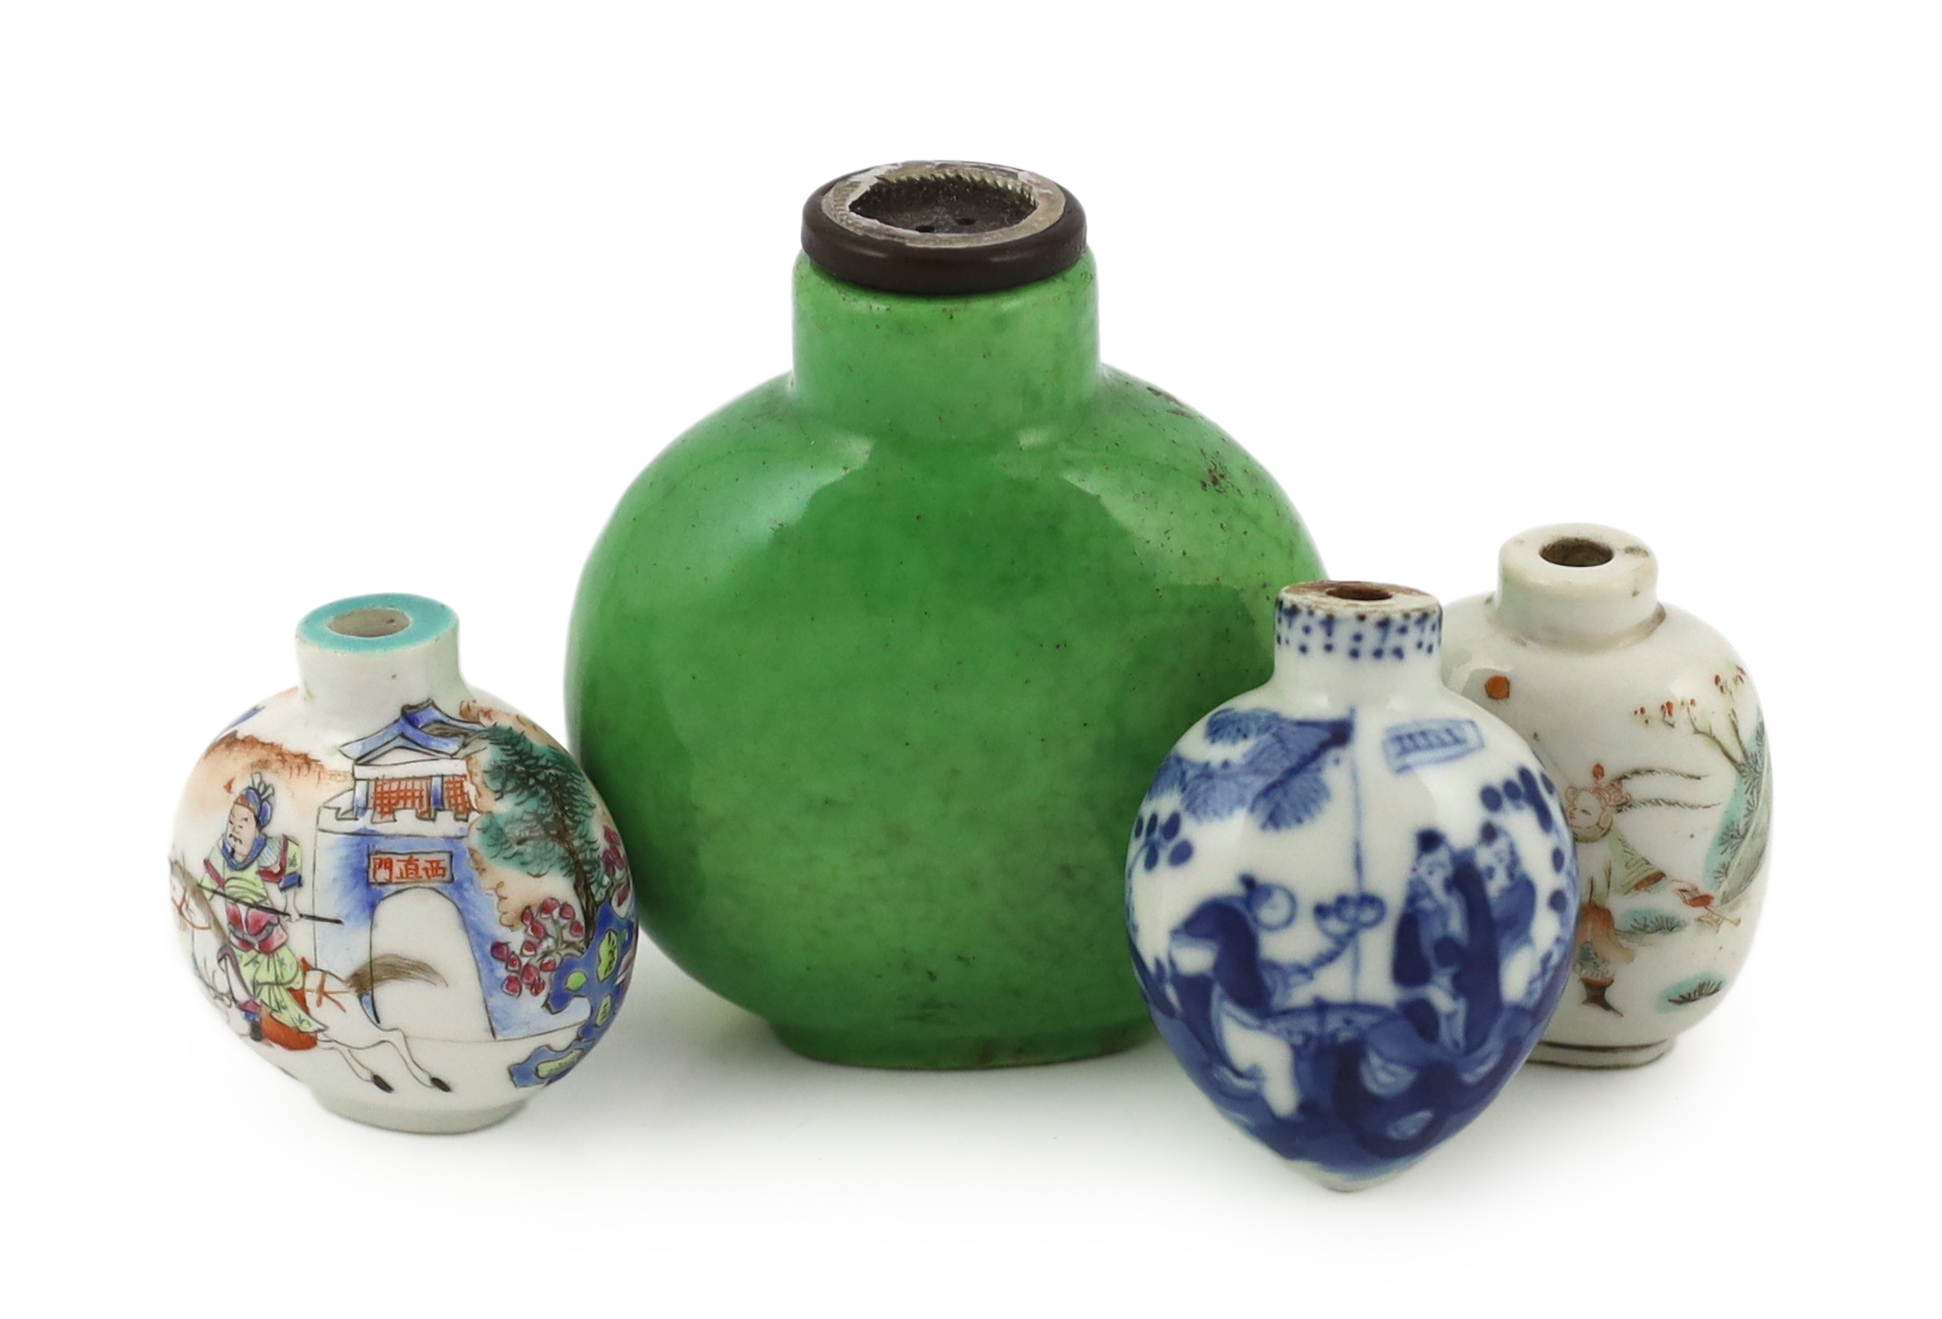 A large Chinese green crackle glazed snuff bottle, Daoguang mark and period, and three other 19th century porcelain snuff bottles                                                                                           